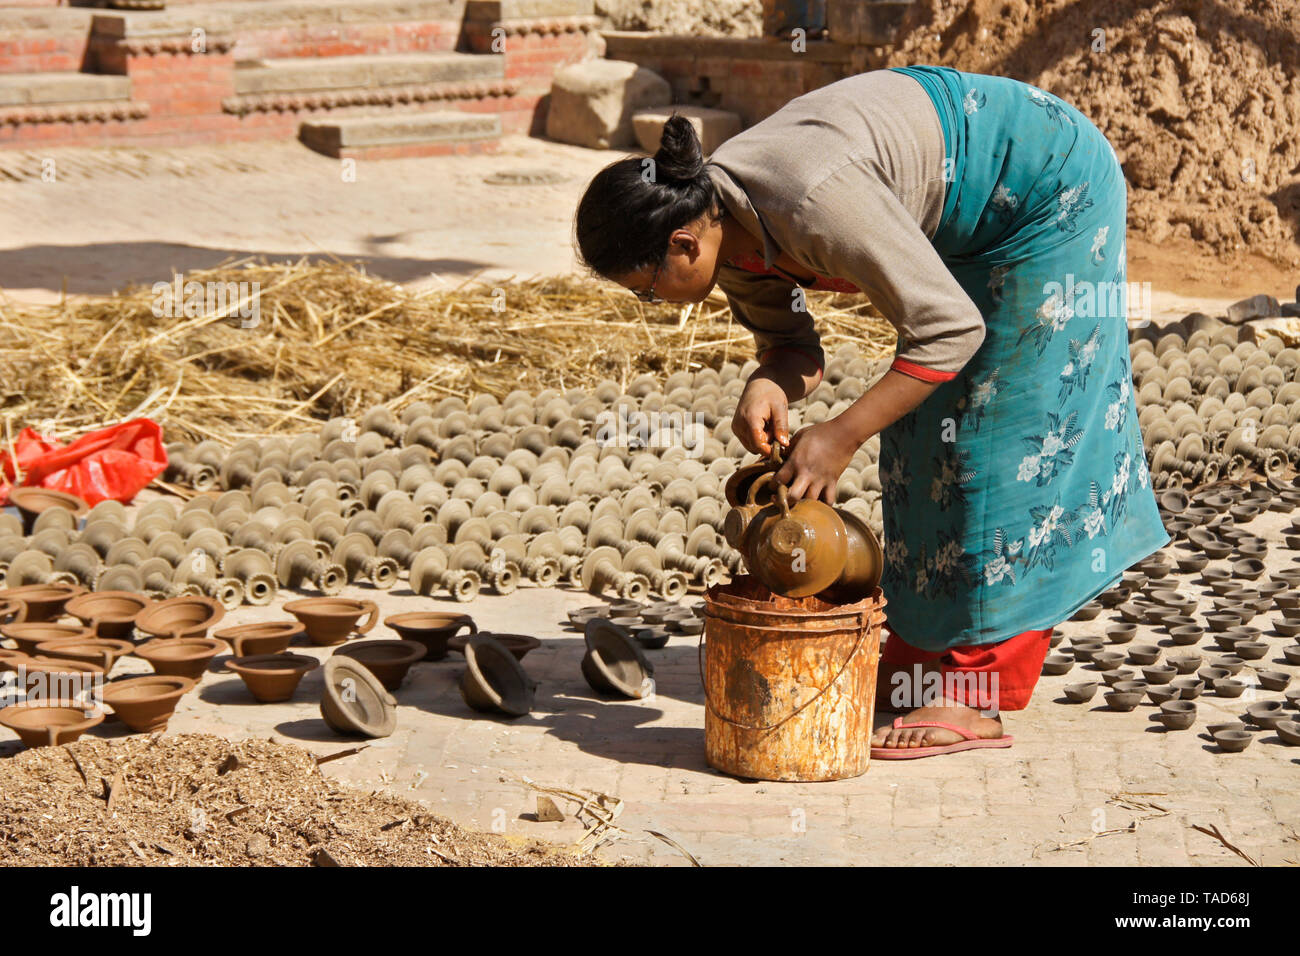 Woman dipping pottery into color as other clay products sun-dry in Kumale Tol (Potters' Square, Pottery Square), Bhaktapur, Kathmandu Valley, Nepal Stock Photo